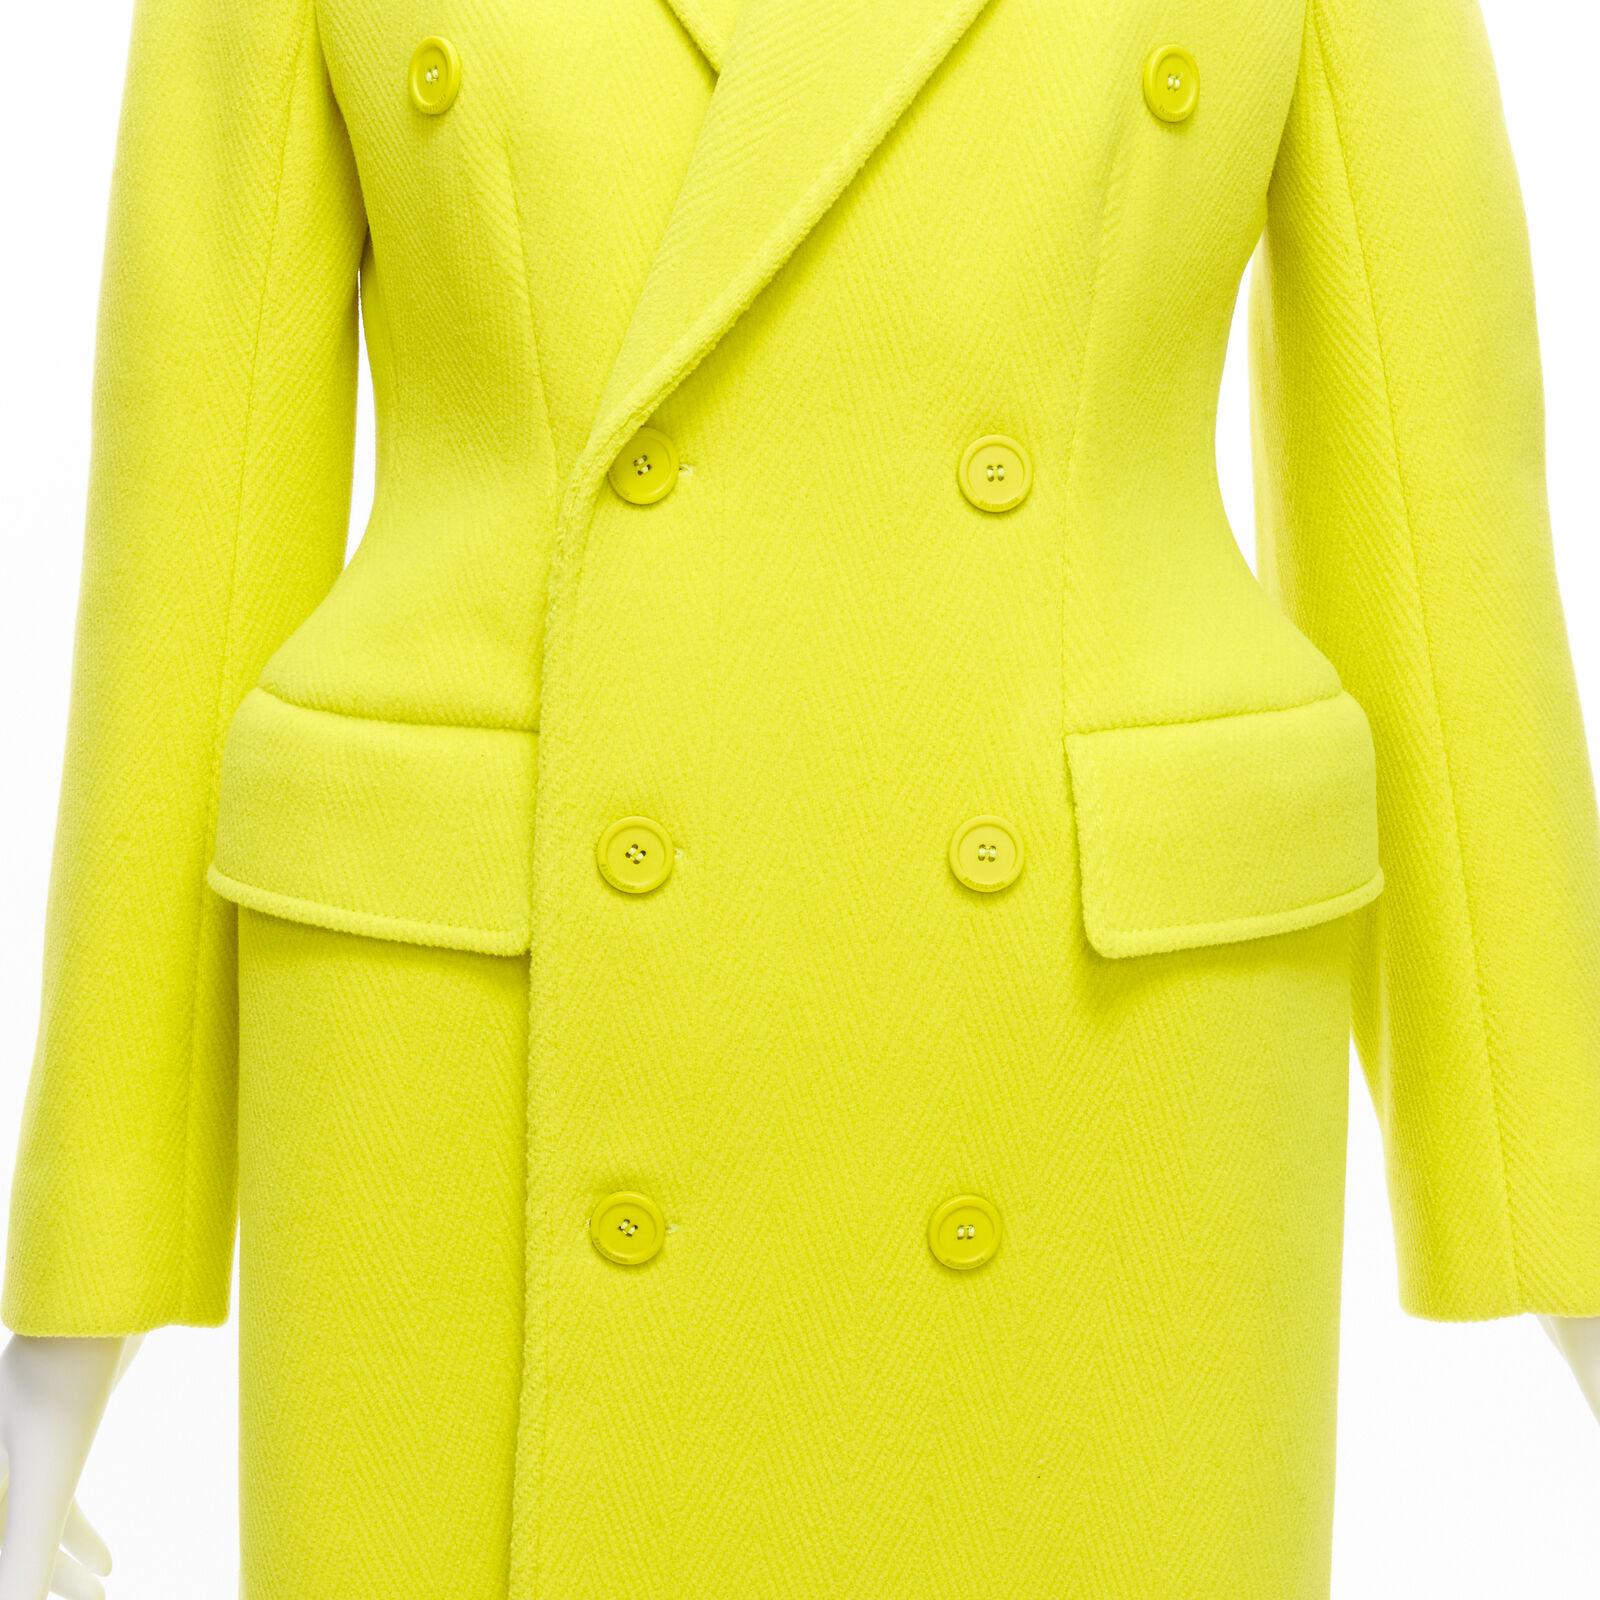 new BALENCIAGA Hourglass bright yellow wool double breasted peplum coat FR34 XS
Reference: TGAS/D00586
Brand: Balenciaga
Designer: Demna
Model: Hourglass
Collection: 2019
Material: Virgin Wool, Polyamide
Color: Neon Green
Pattern: Solid
Closure: